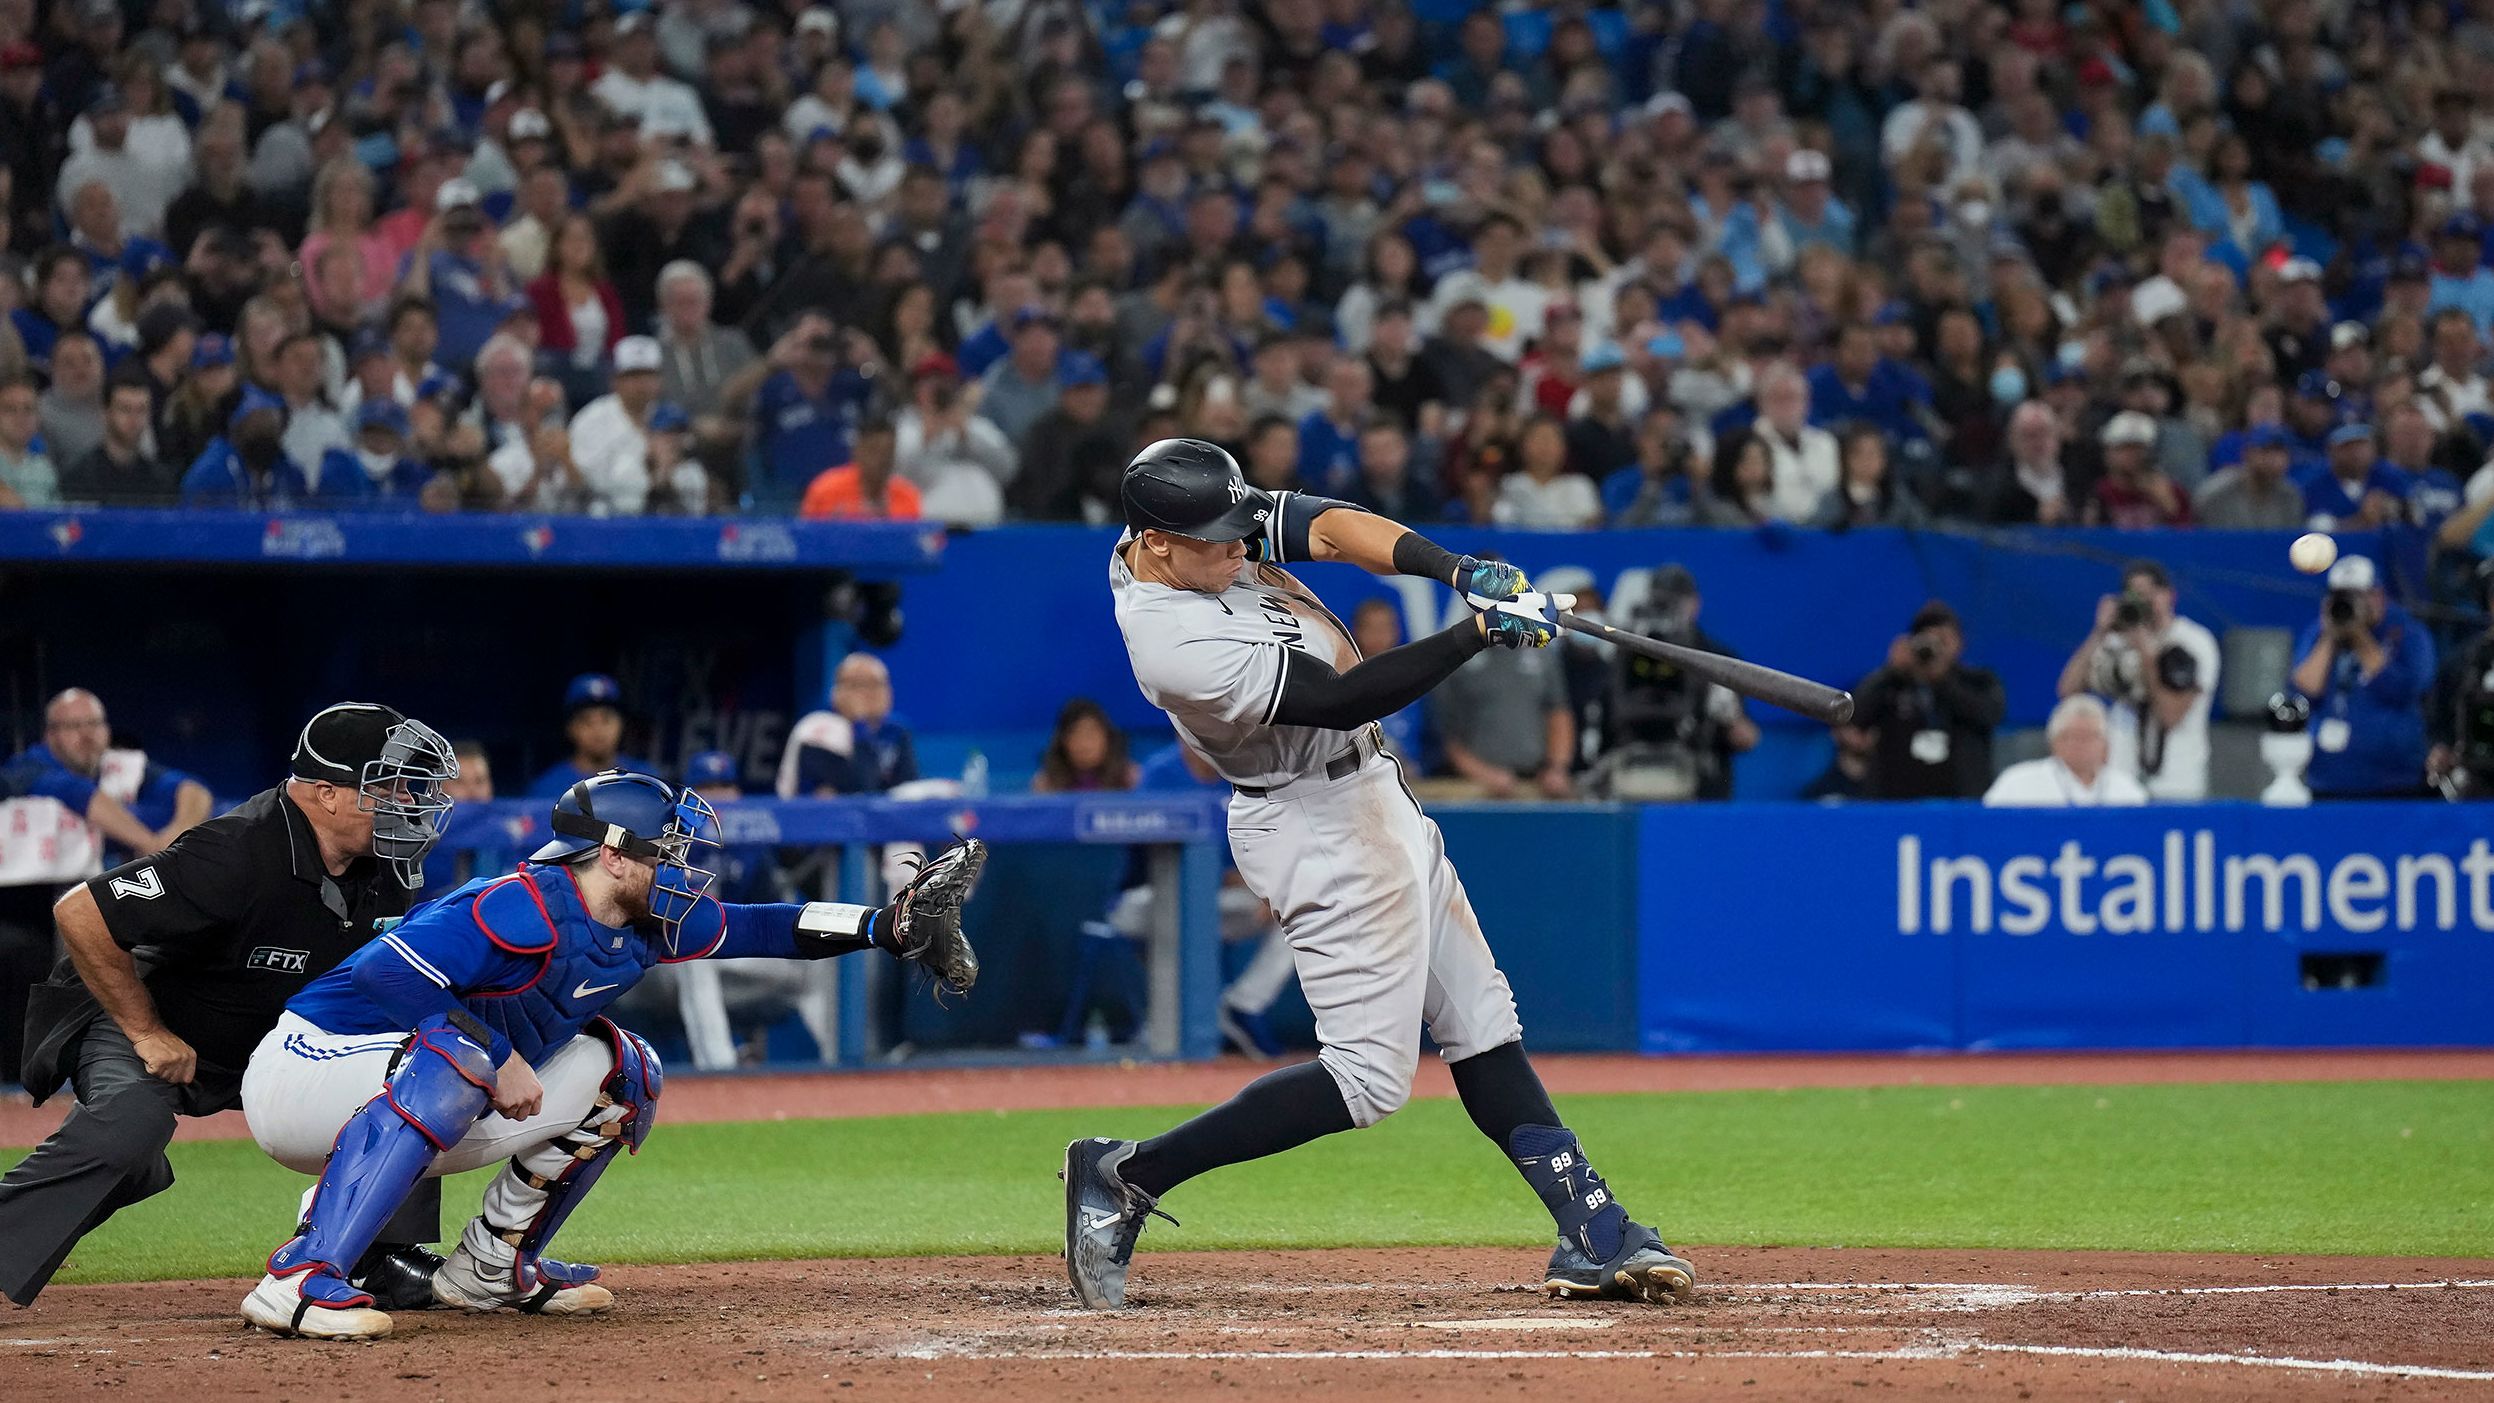 New York Yankees slugger Aaron Judge hits his 61st home run of the season, <a href="https://www.cnn.com/2022/09/28/sport/aaron-judge-home-run-record-roger-maris-spt-intl/index.html" target="_blank">tying the American League record</a> Wednesday, September 28, in Toronto. He tied Roger Maris, who set the mark in 1961 — 61 years ago.